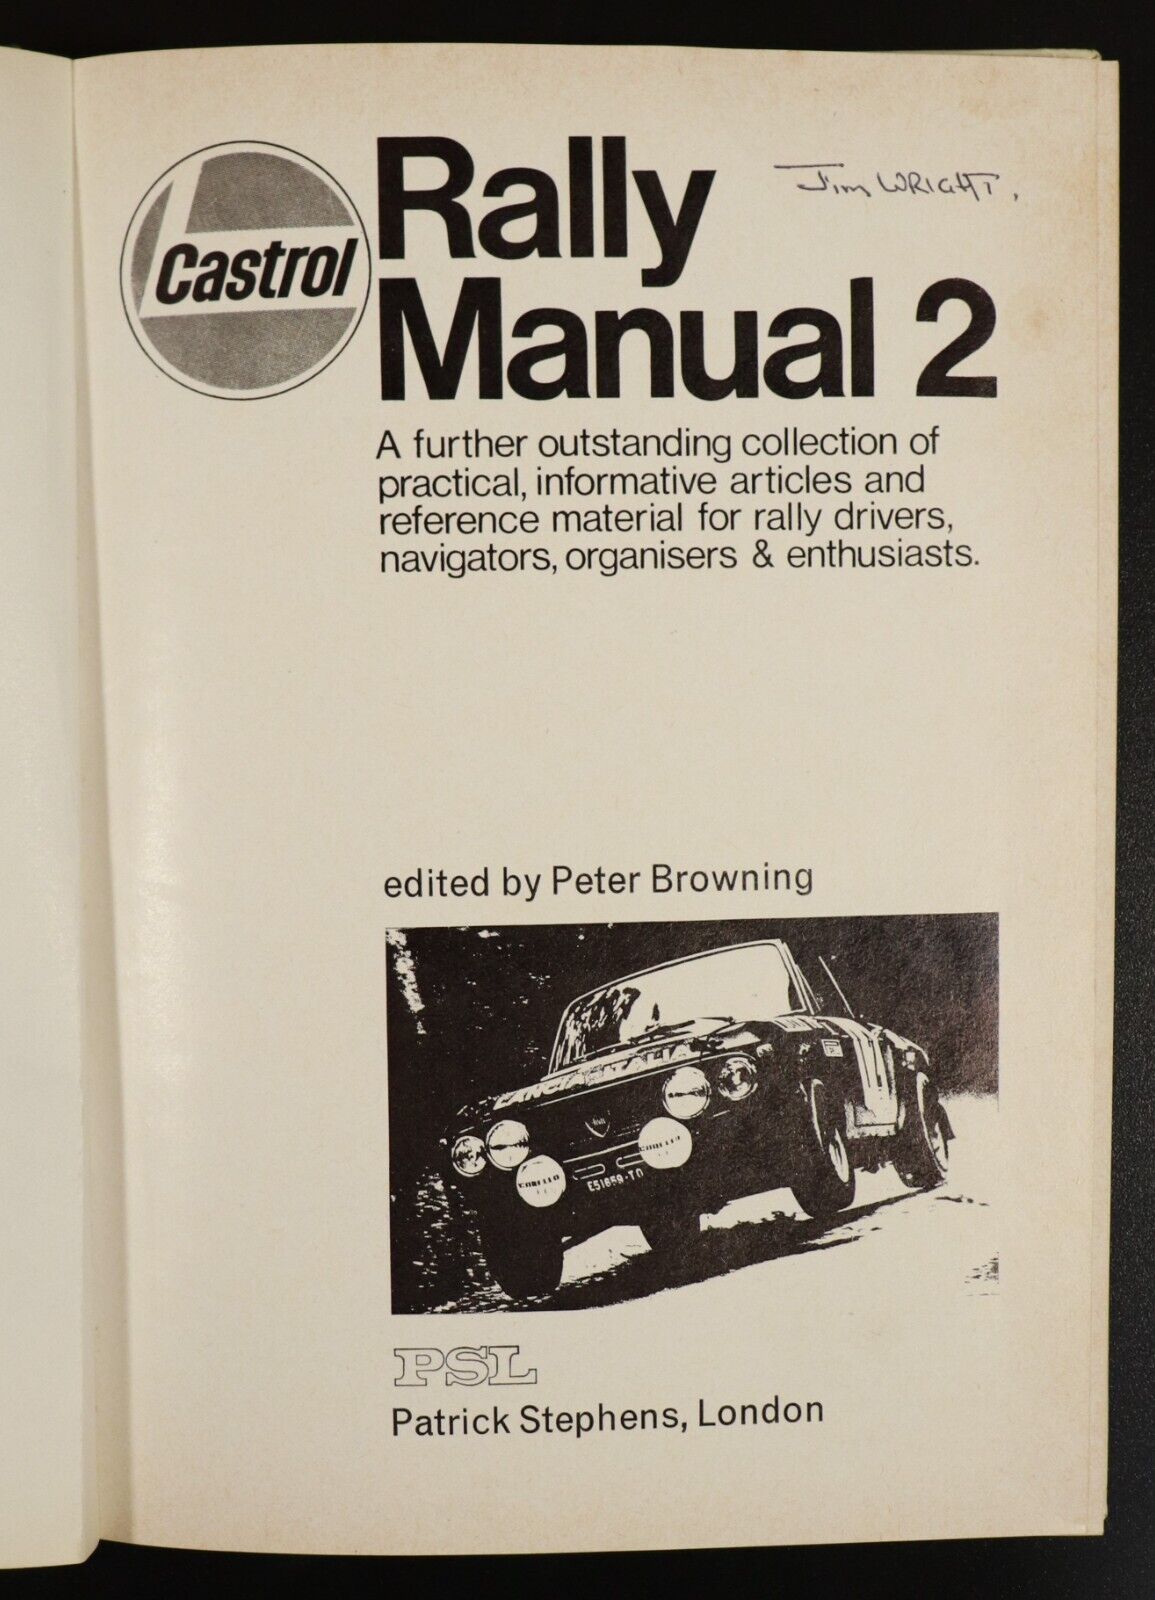 1972 Castrol Rally Manual 2 by Peter Browning Vintage Automotive Book Rally Cars - 0